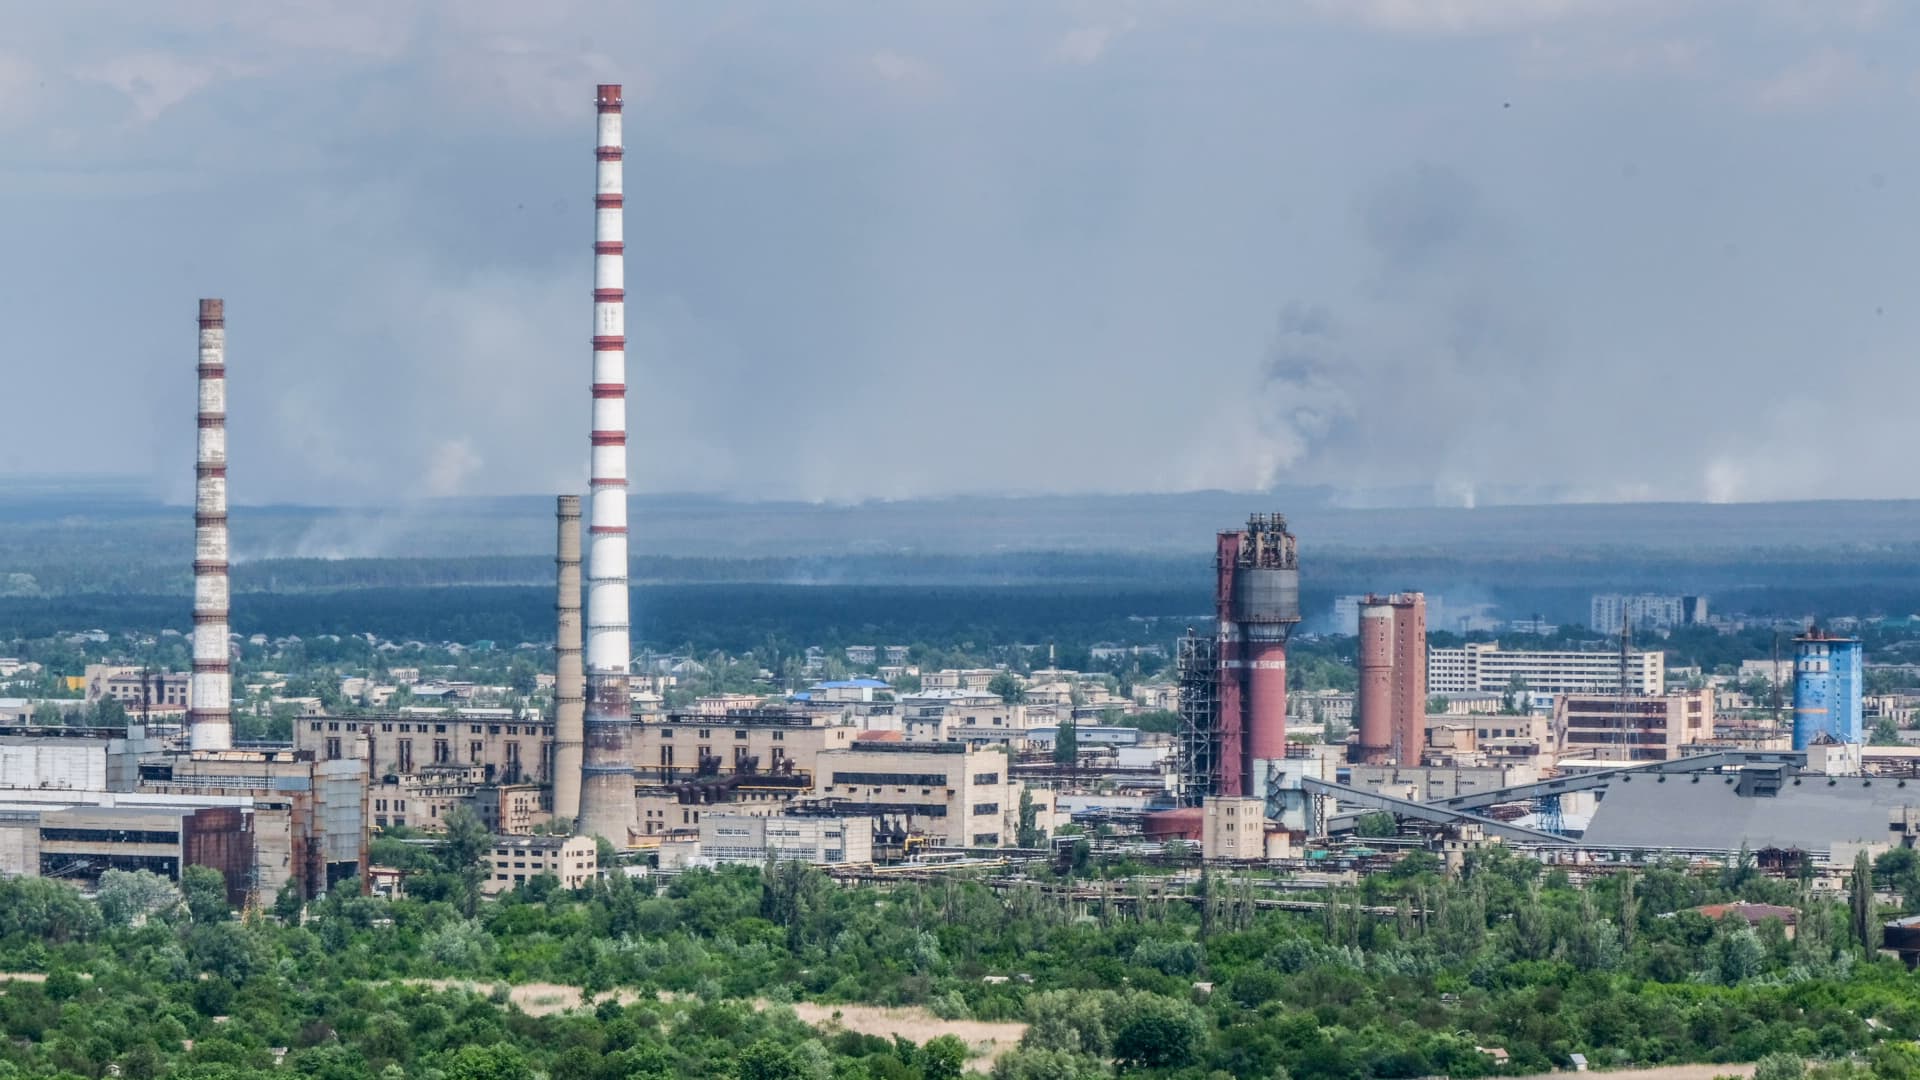 Sievierodonetsk is one of three towns that constitute one of Ukraine's largest chemical complexes. The area is now the frontline as Russian troops move closer to the city.